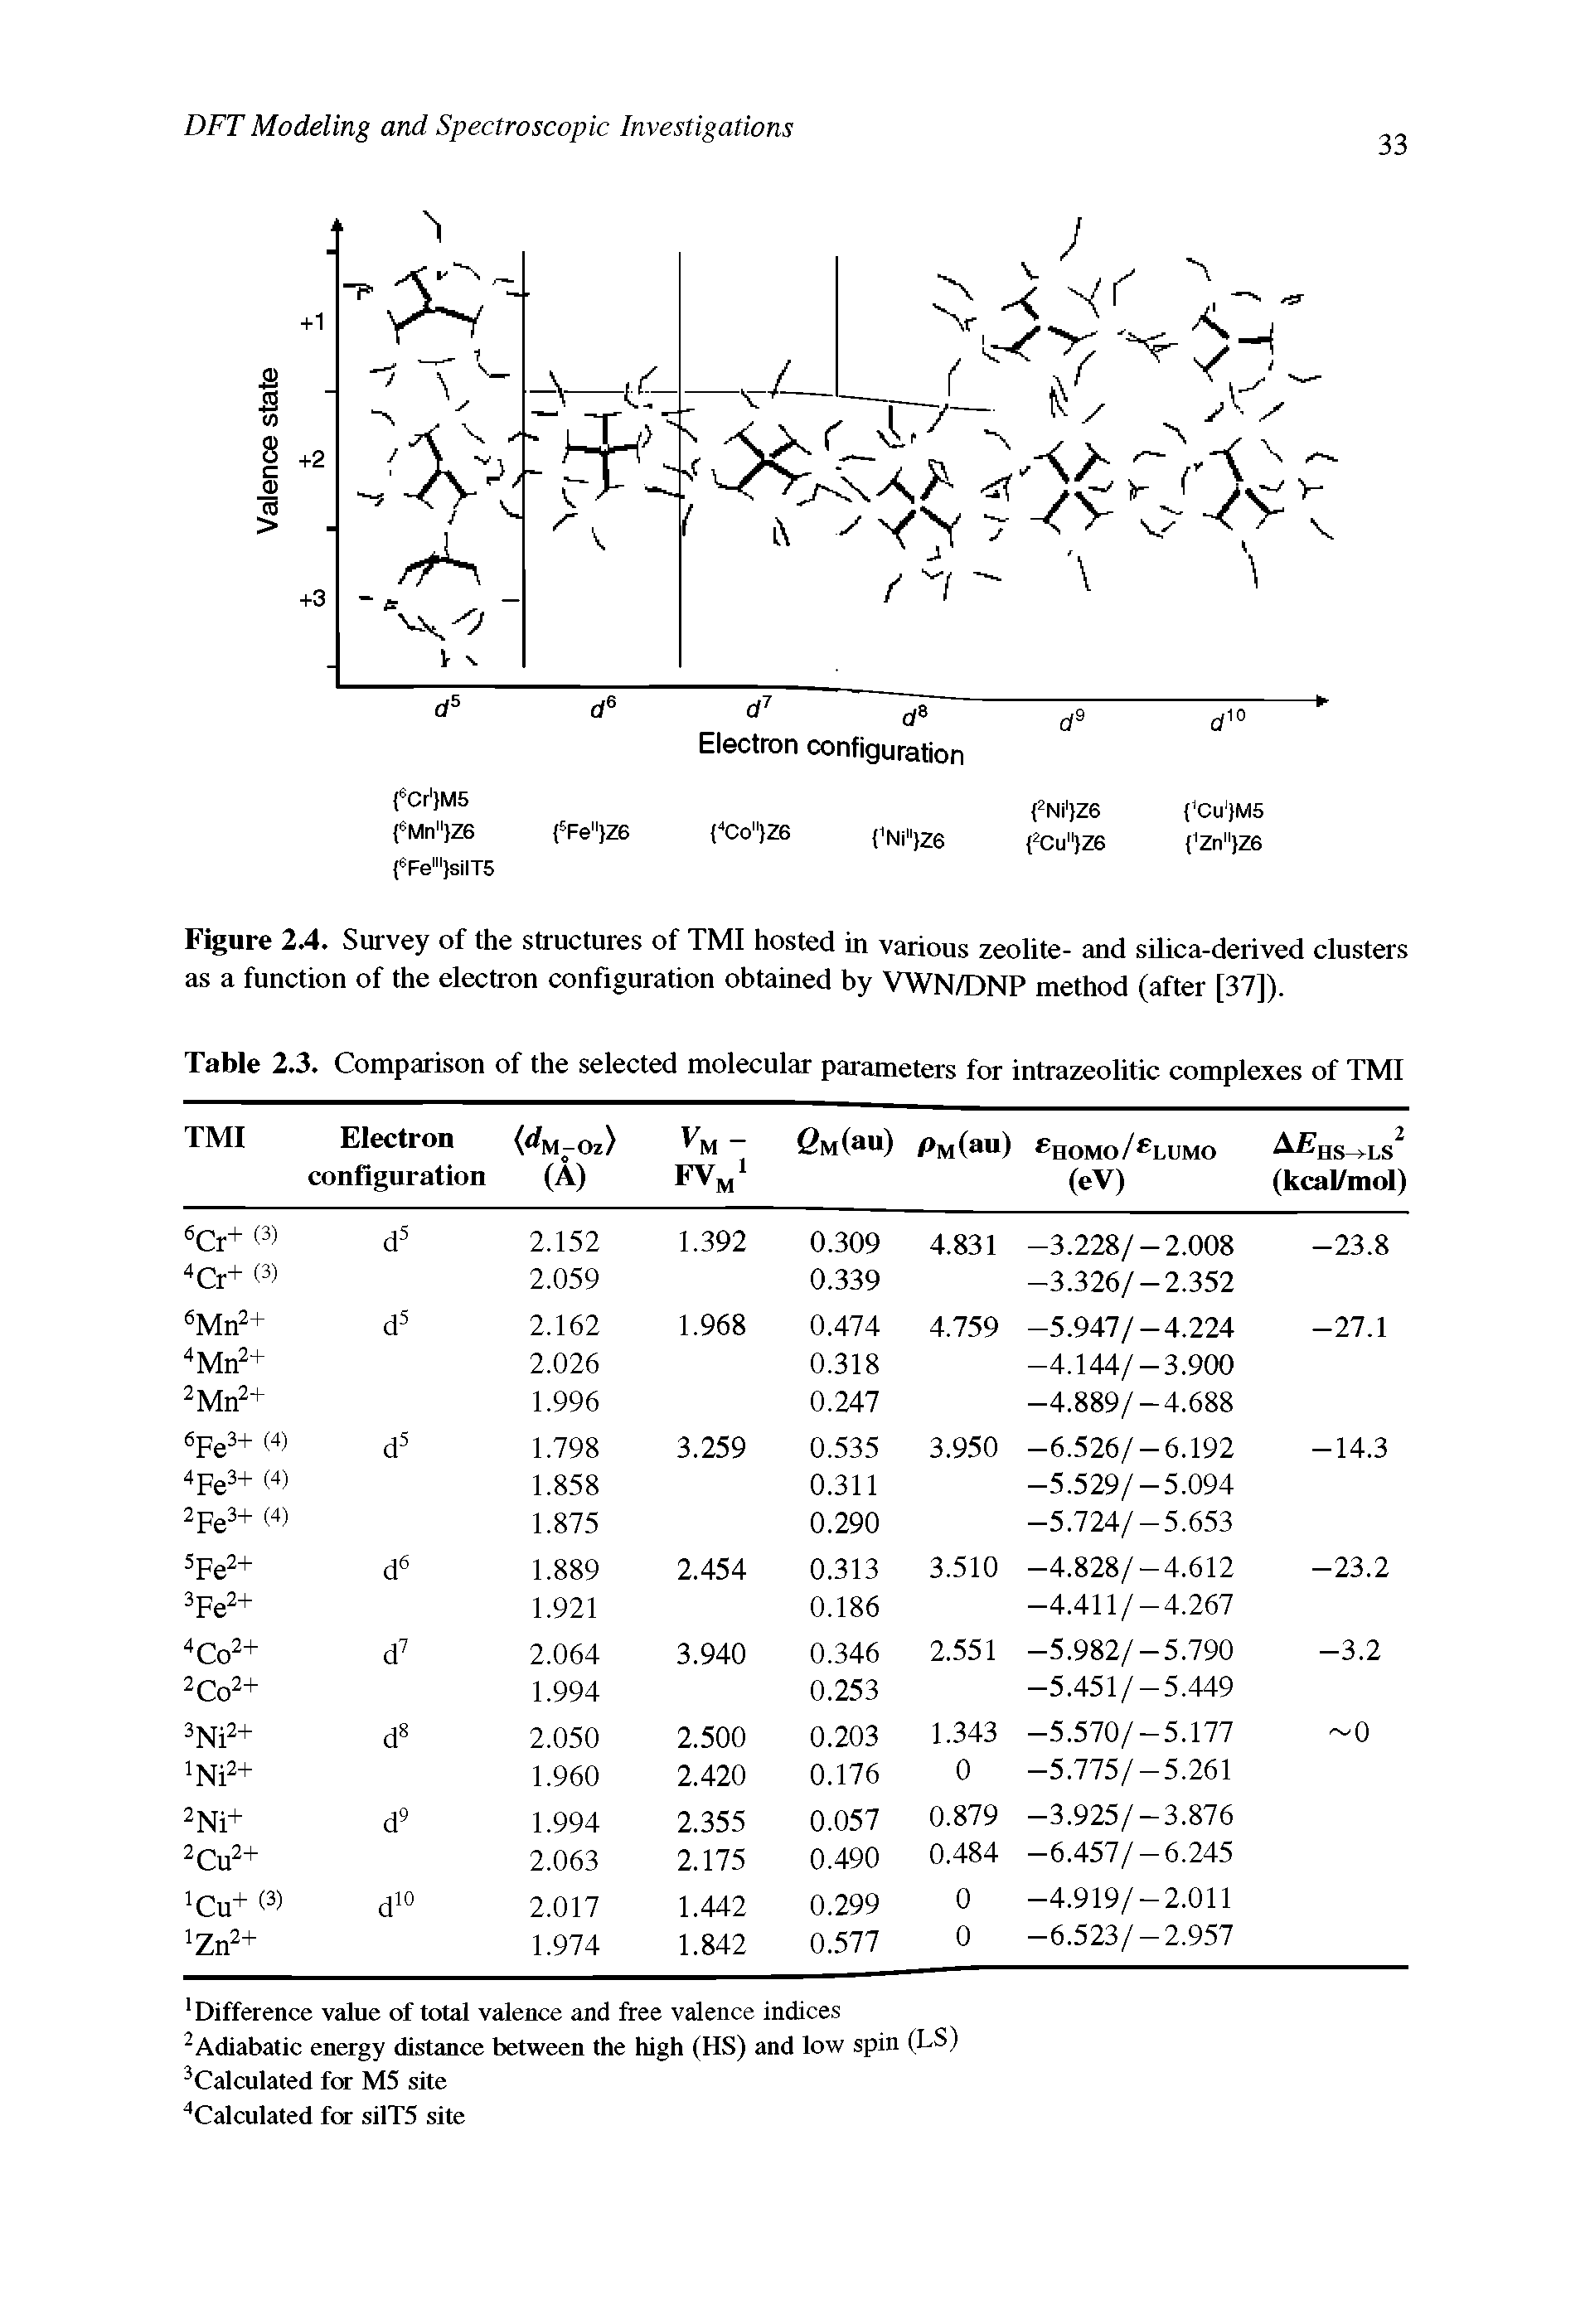 Figure 2.4. Survey of the structures of TMI hosted in various zeolite- and silica-derived clusters as a function of the electron configuration obtained by VWN/DNP method (after [37]).